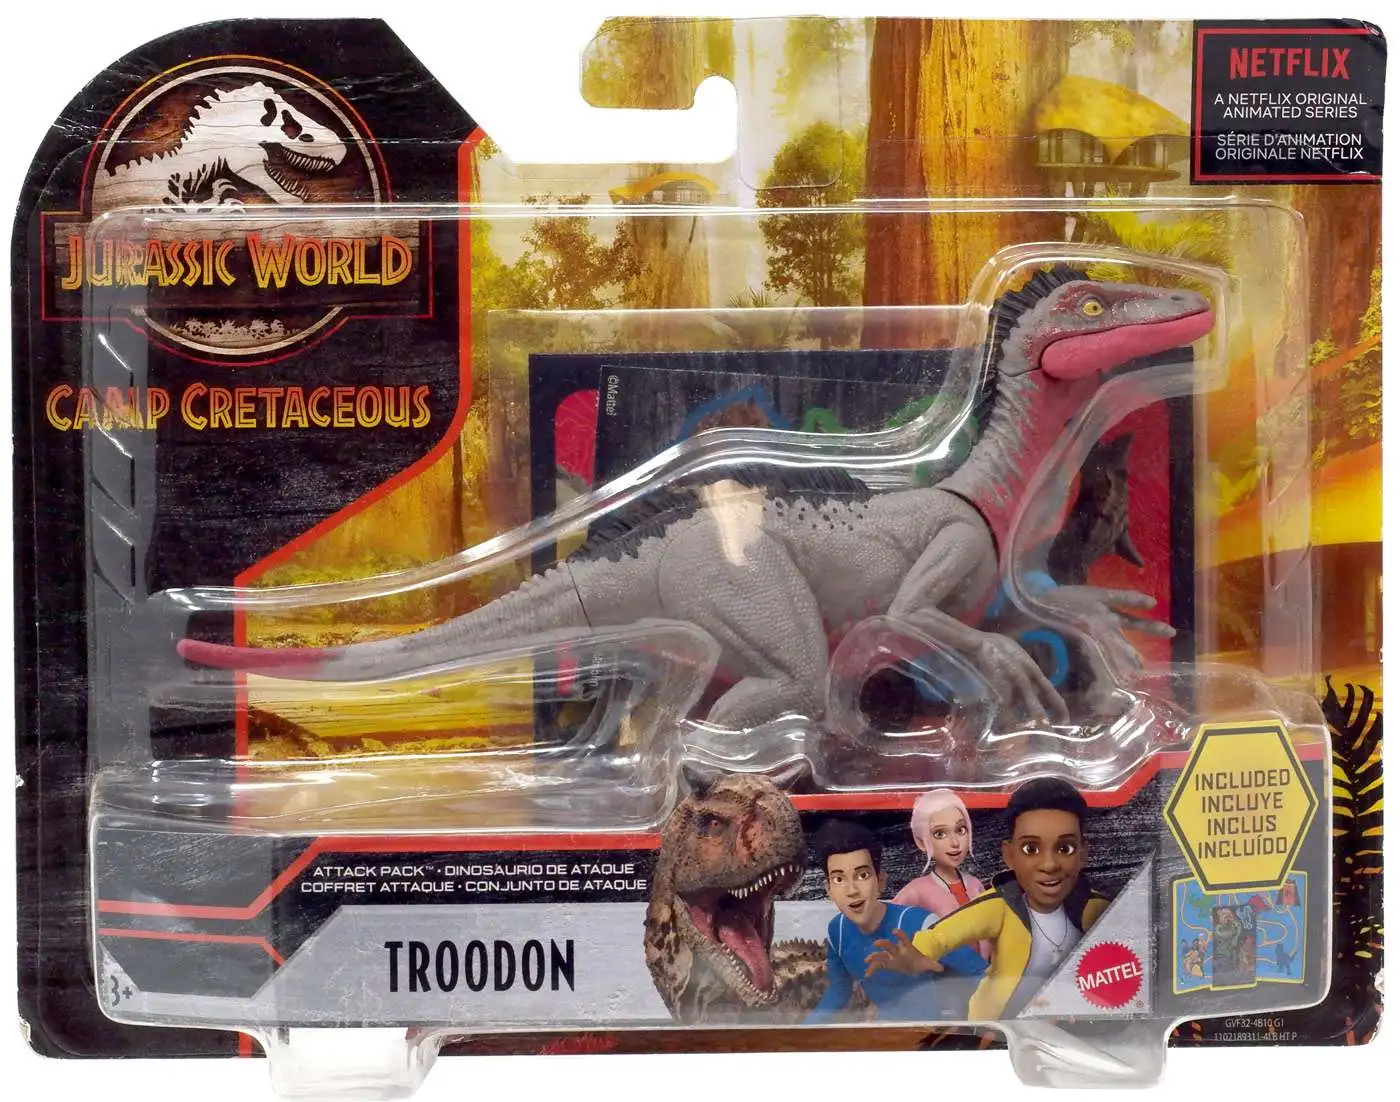 Details about   Troodon Jurassic World Figure Camp Cretaceous ✅✅HTF SHIPS TODAY 